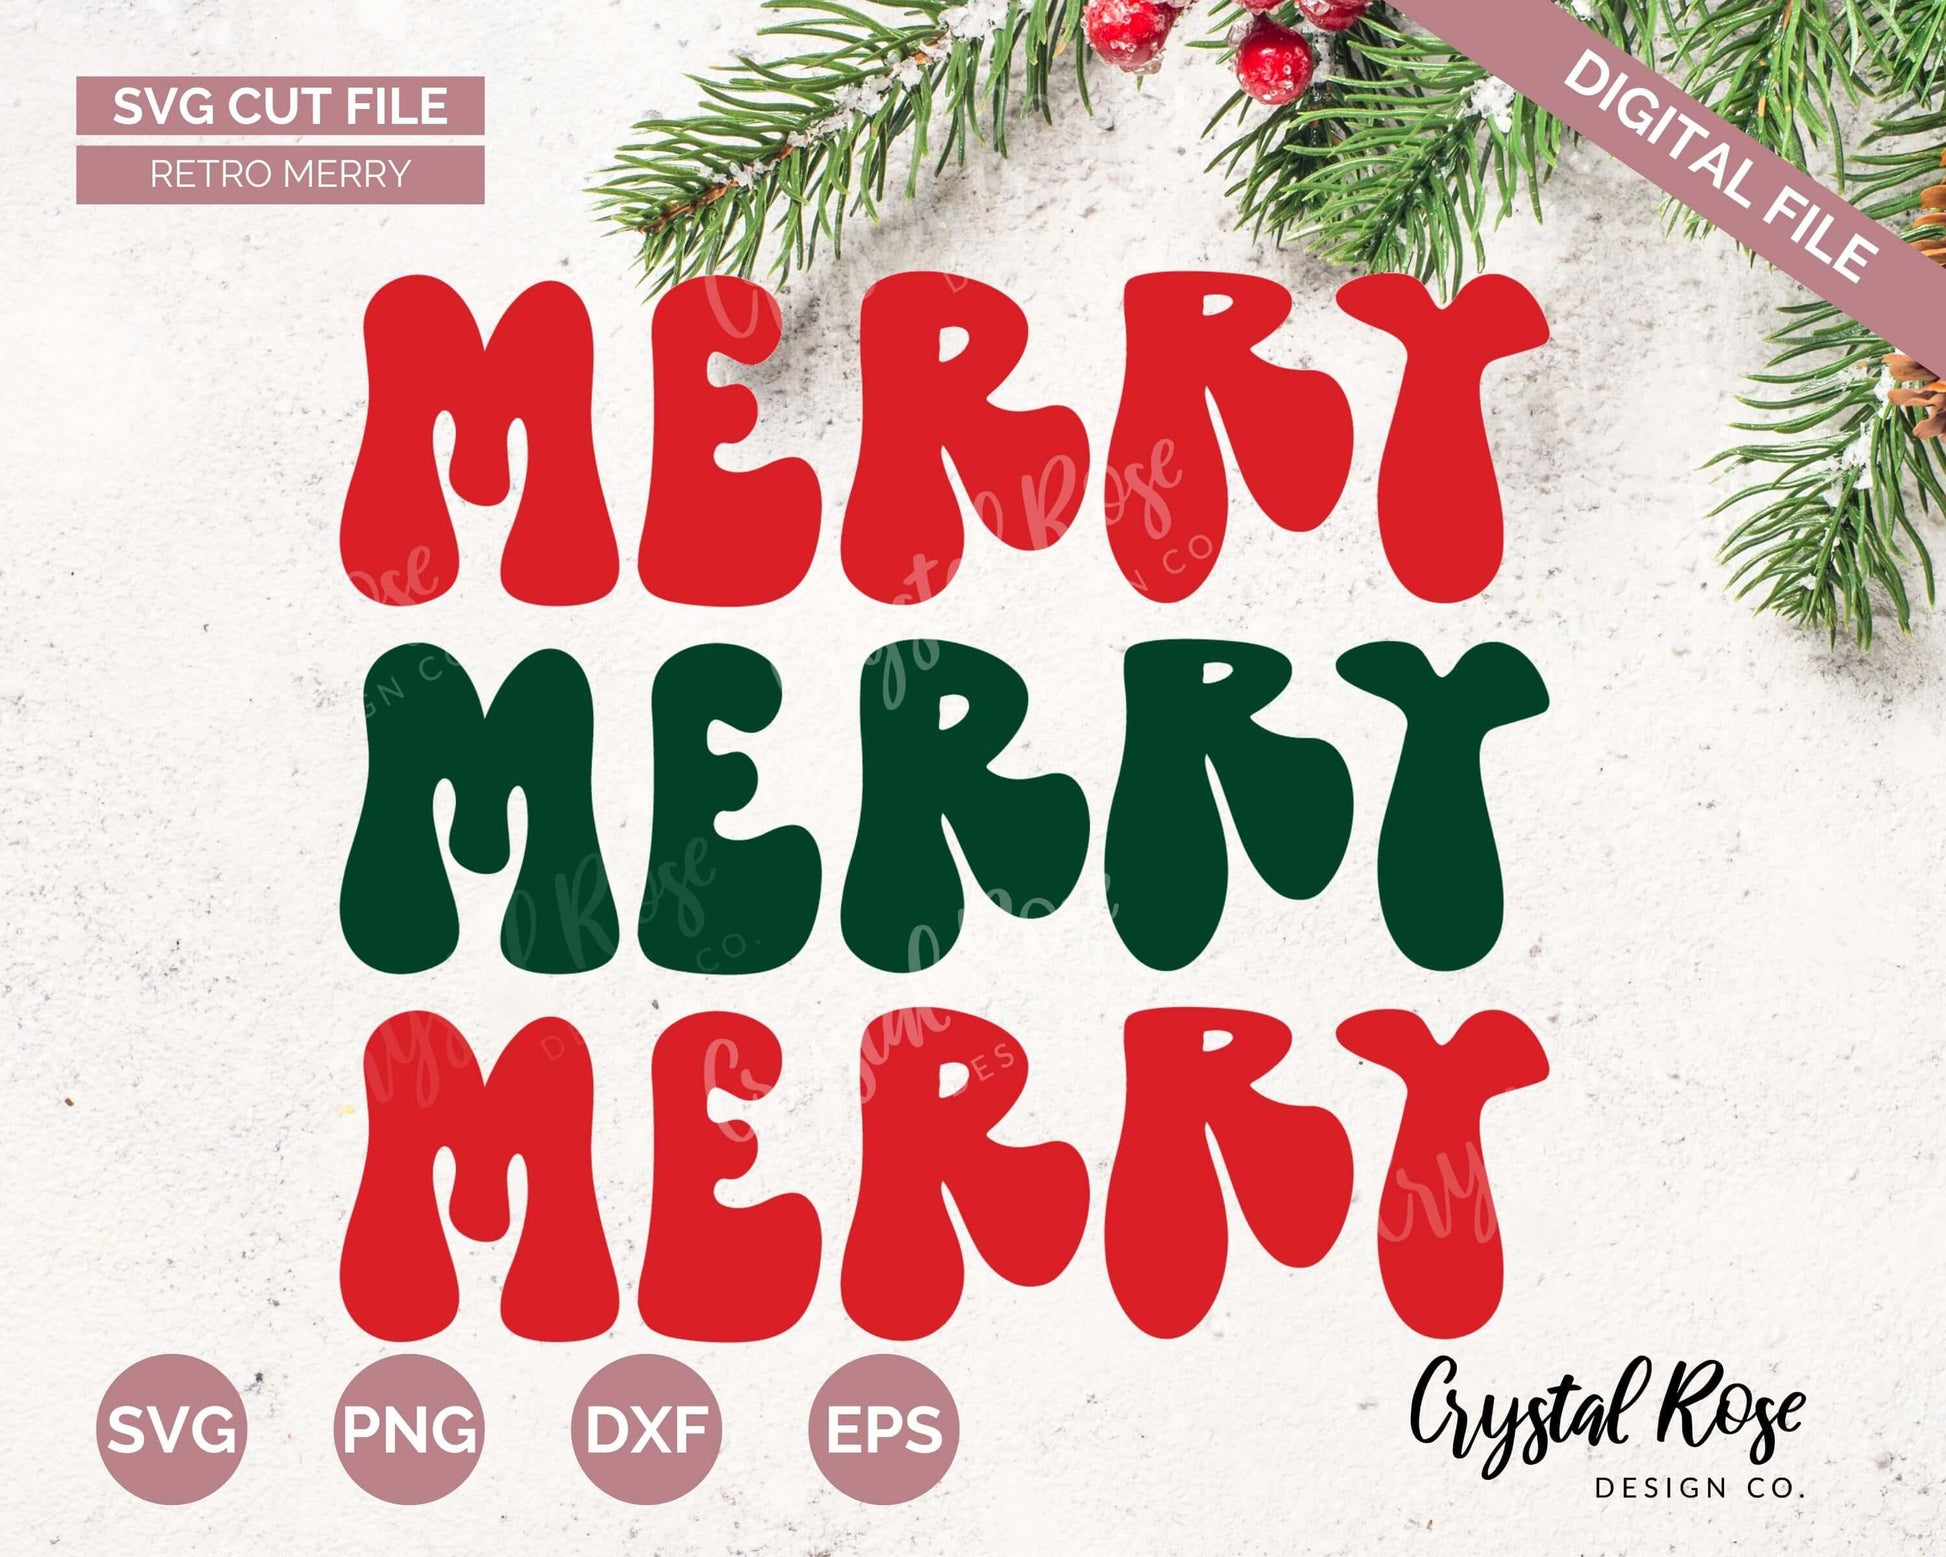 Retro Merry SVG, Christmas SVG, Digital Download, Cricut, Silhouette, Glowforge (includes svg/png/dxf/eps) - Crystal Rose Design Co.